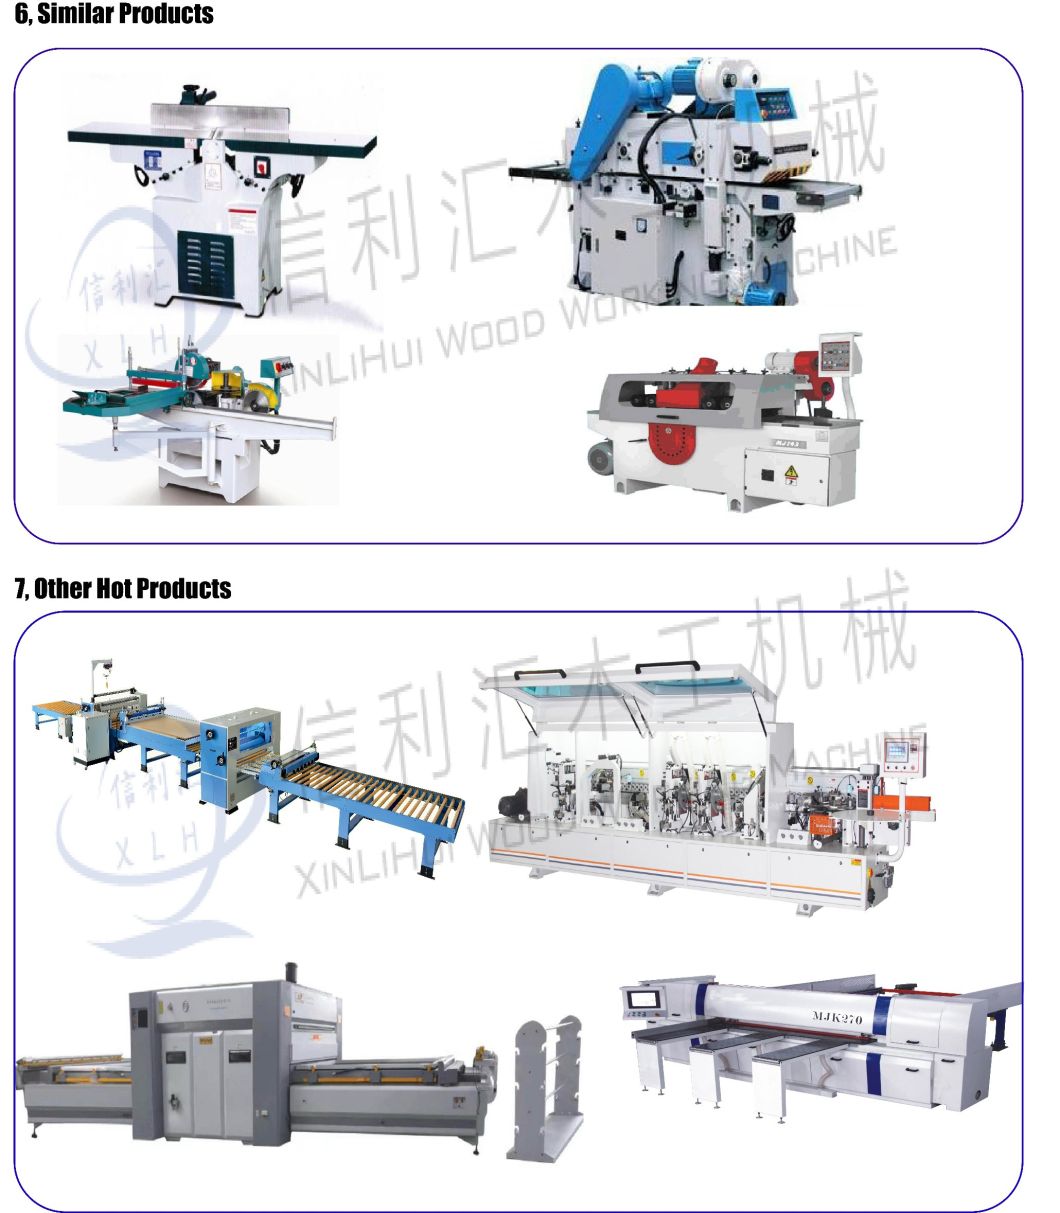 Straight Line Woodworking Multi Blade Rip Saw Timber Cutting Saw Machine for Wood Log Multi Blade Rip Saw Timber Cutting Multi Rip Saw